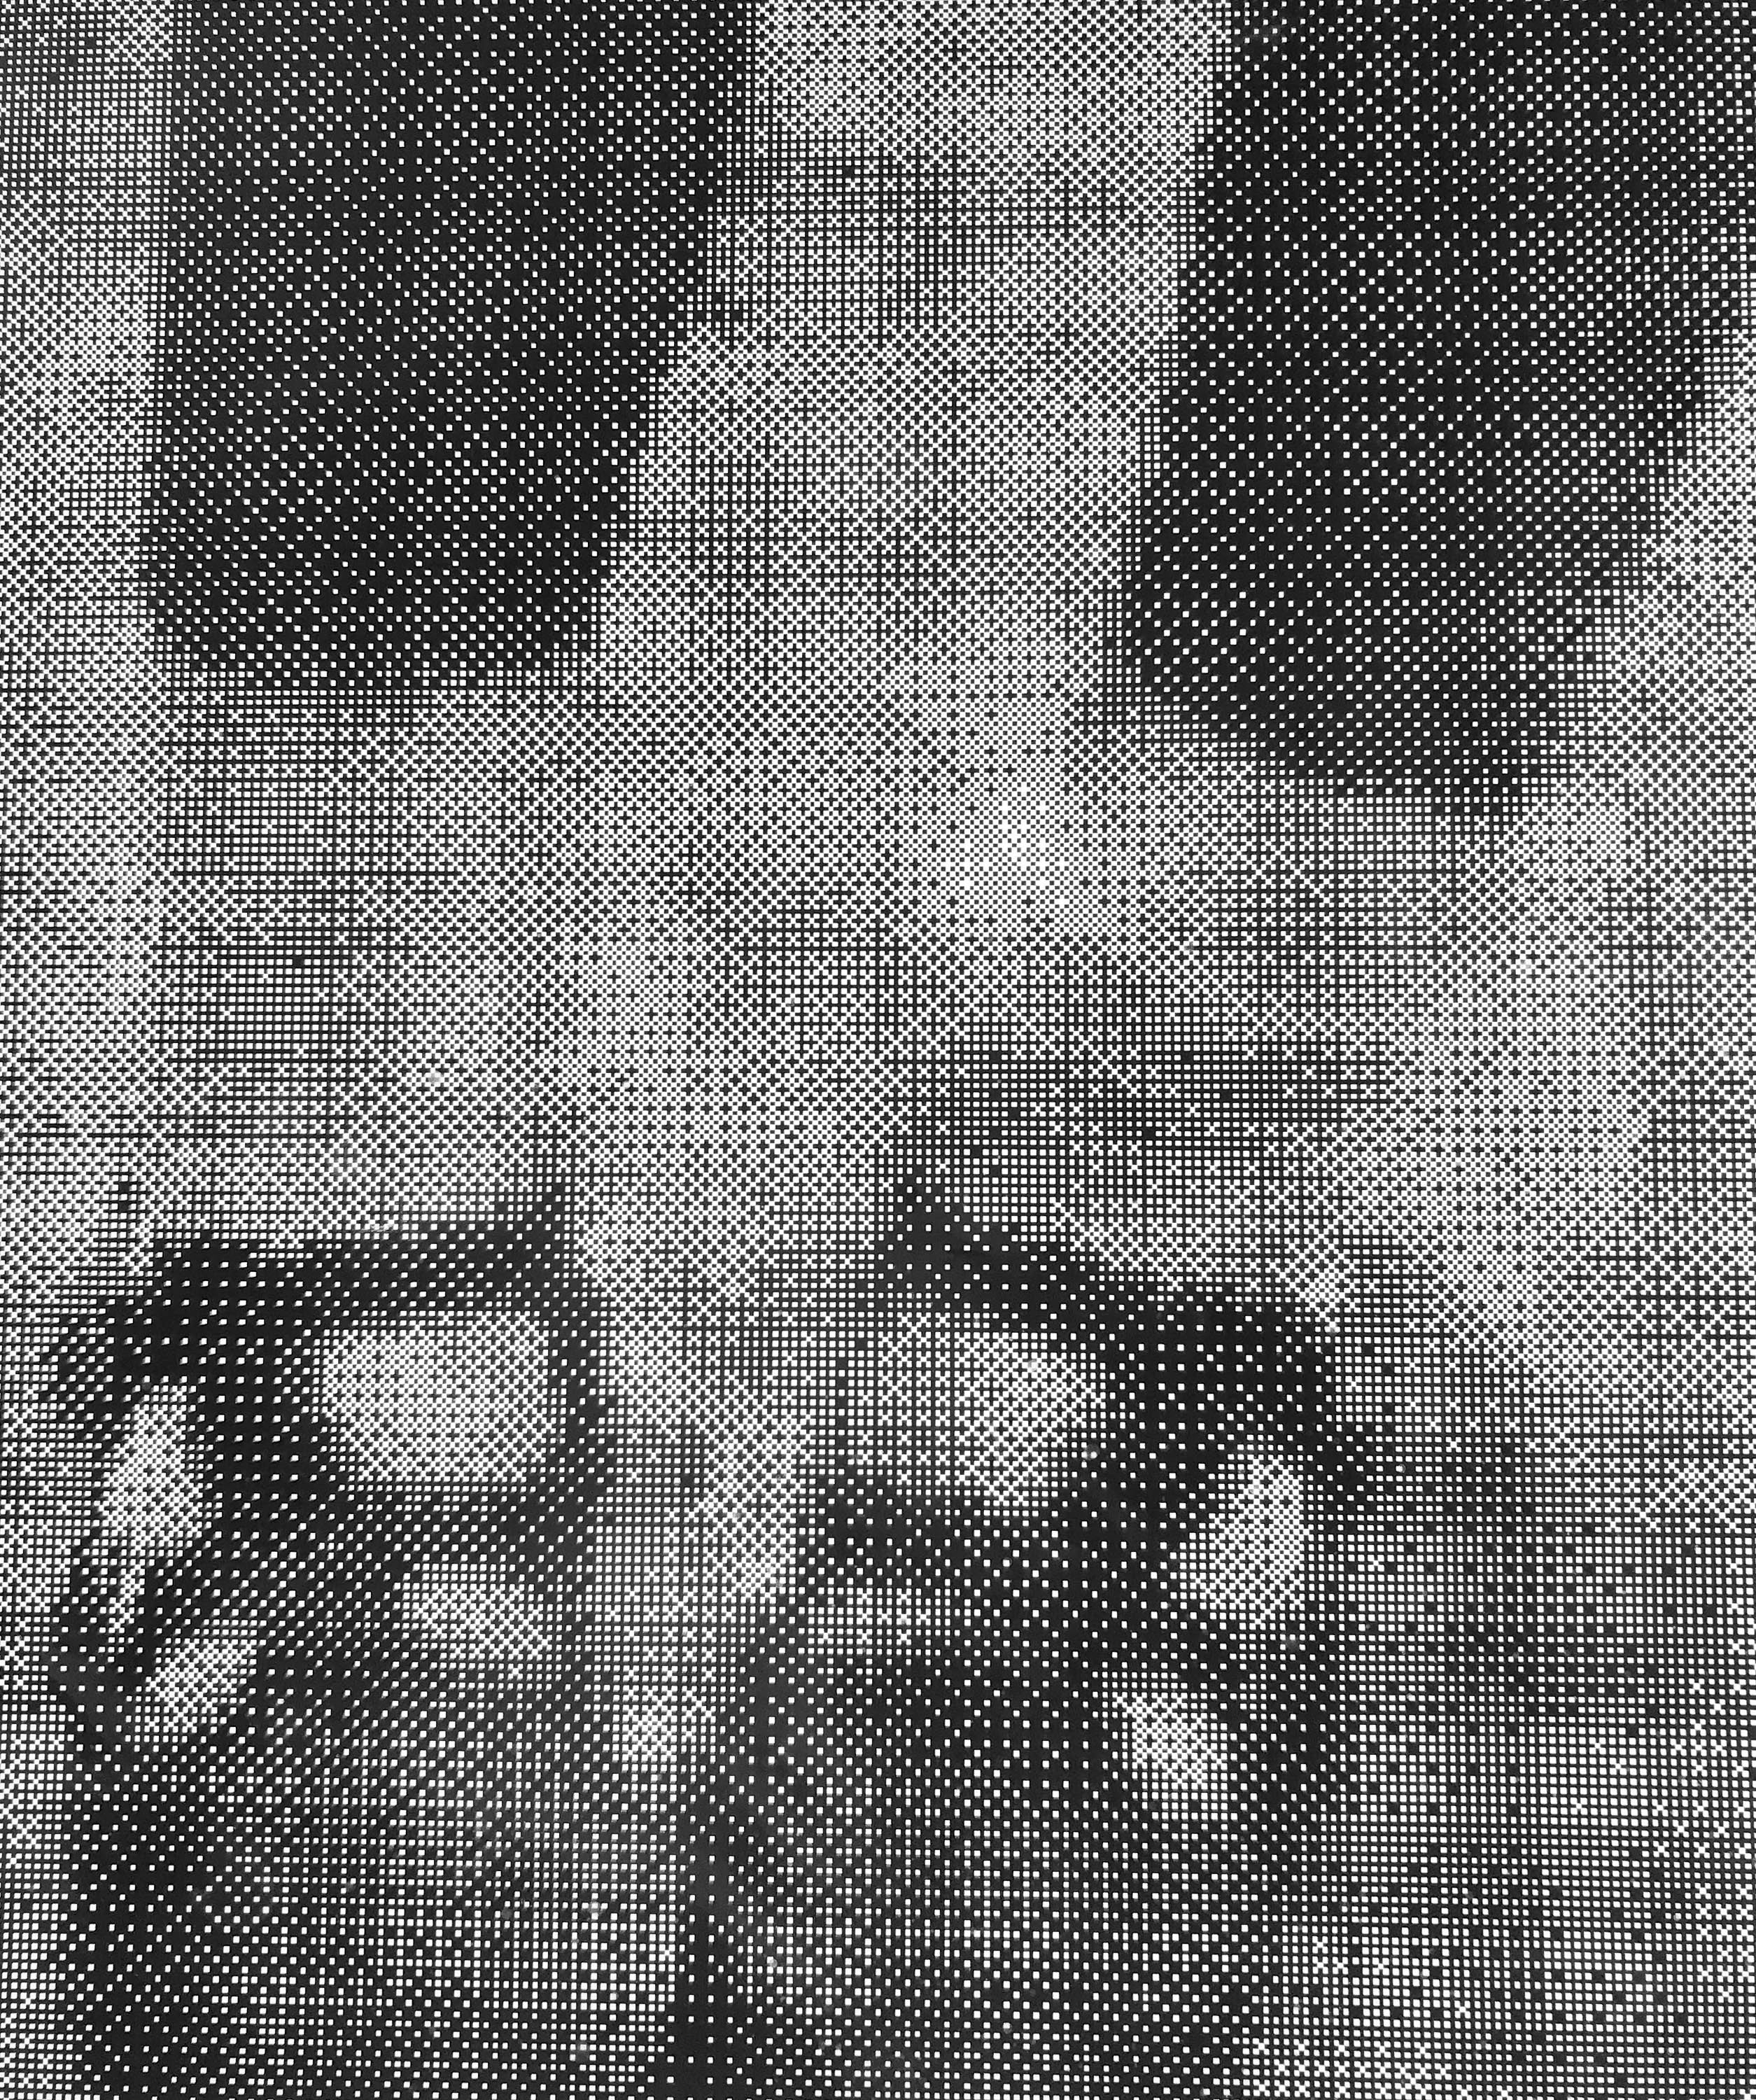 black and white photograph of a child's buckled shoes, turned into halftones.